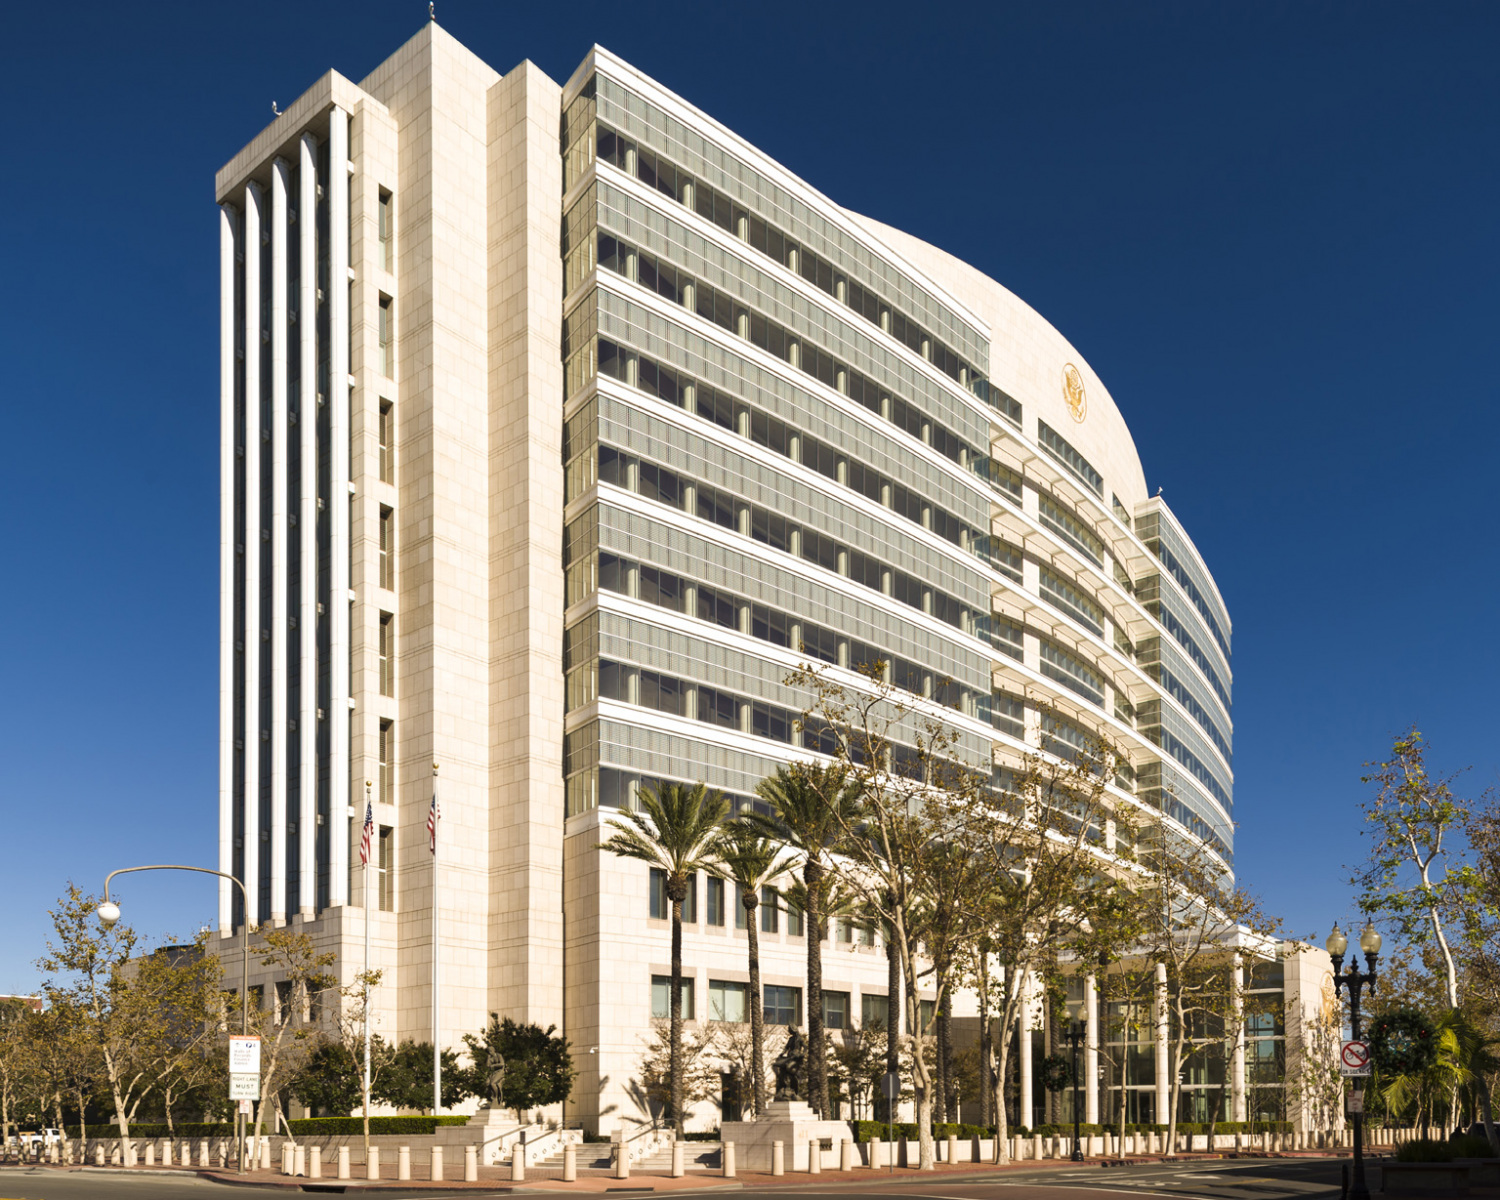 An image of the Ronald Reagan Federal Building and United States Courthouse in Santa Ana, California.  The Santa Ana courthouse, designed by Gruen Associates, was completed in 1998.  The federal courthouse is home of the United States District Court for the Central District of California.  This image © Capitolshots Photography, ALL RIGHTS RESERVED.